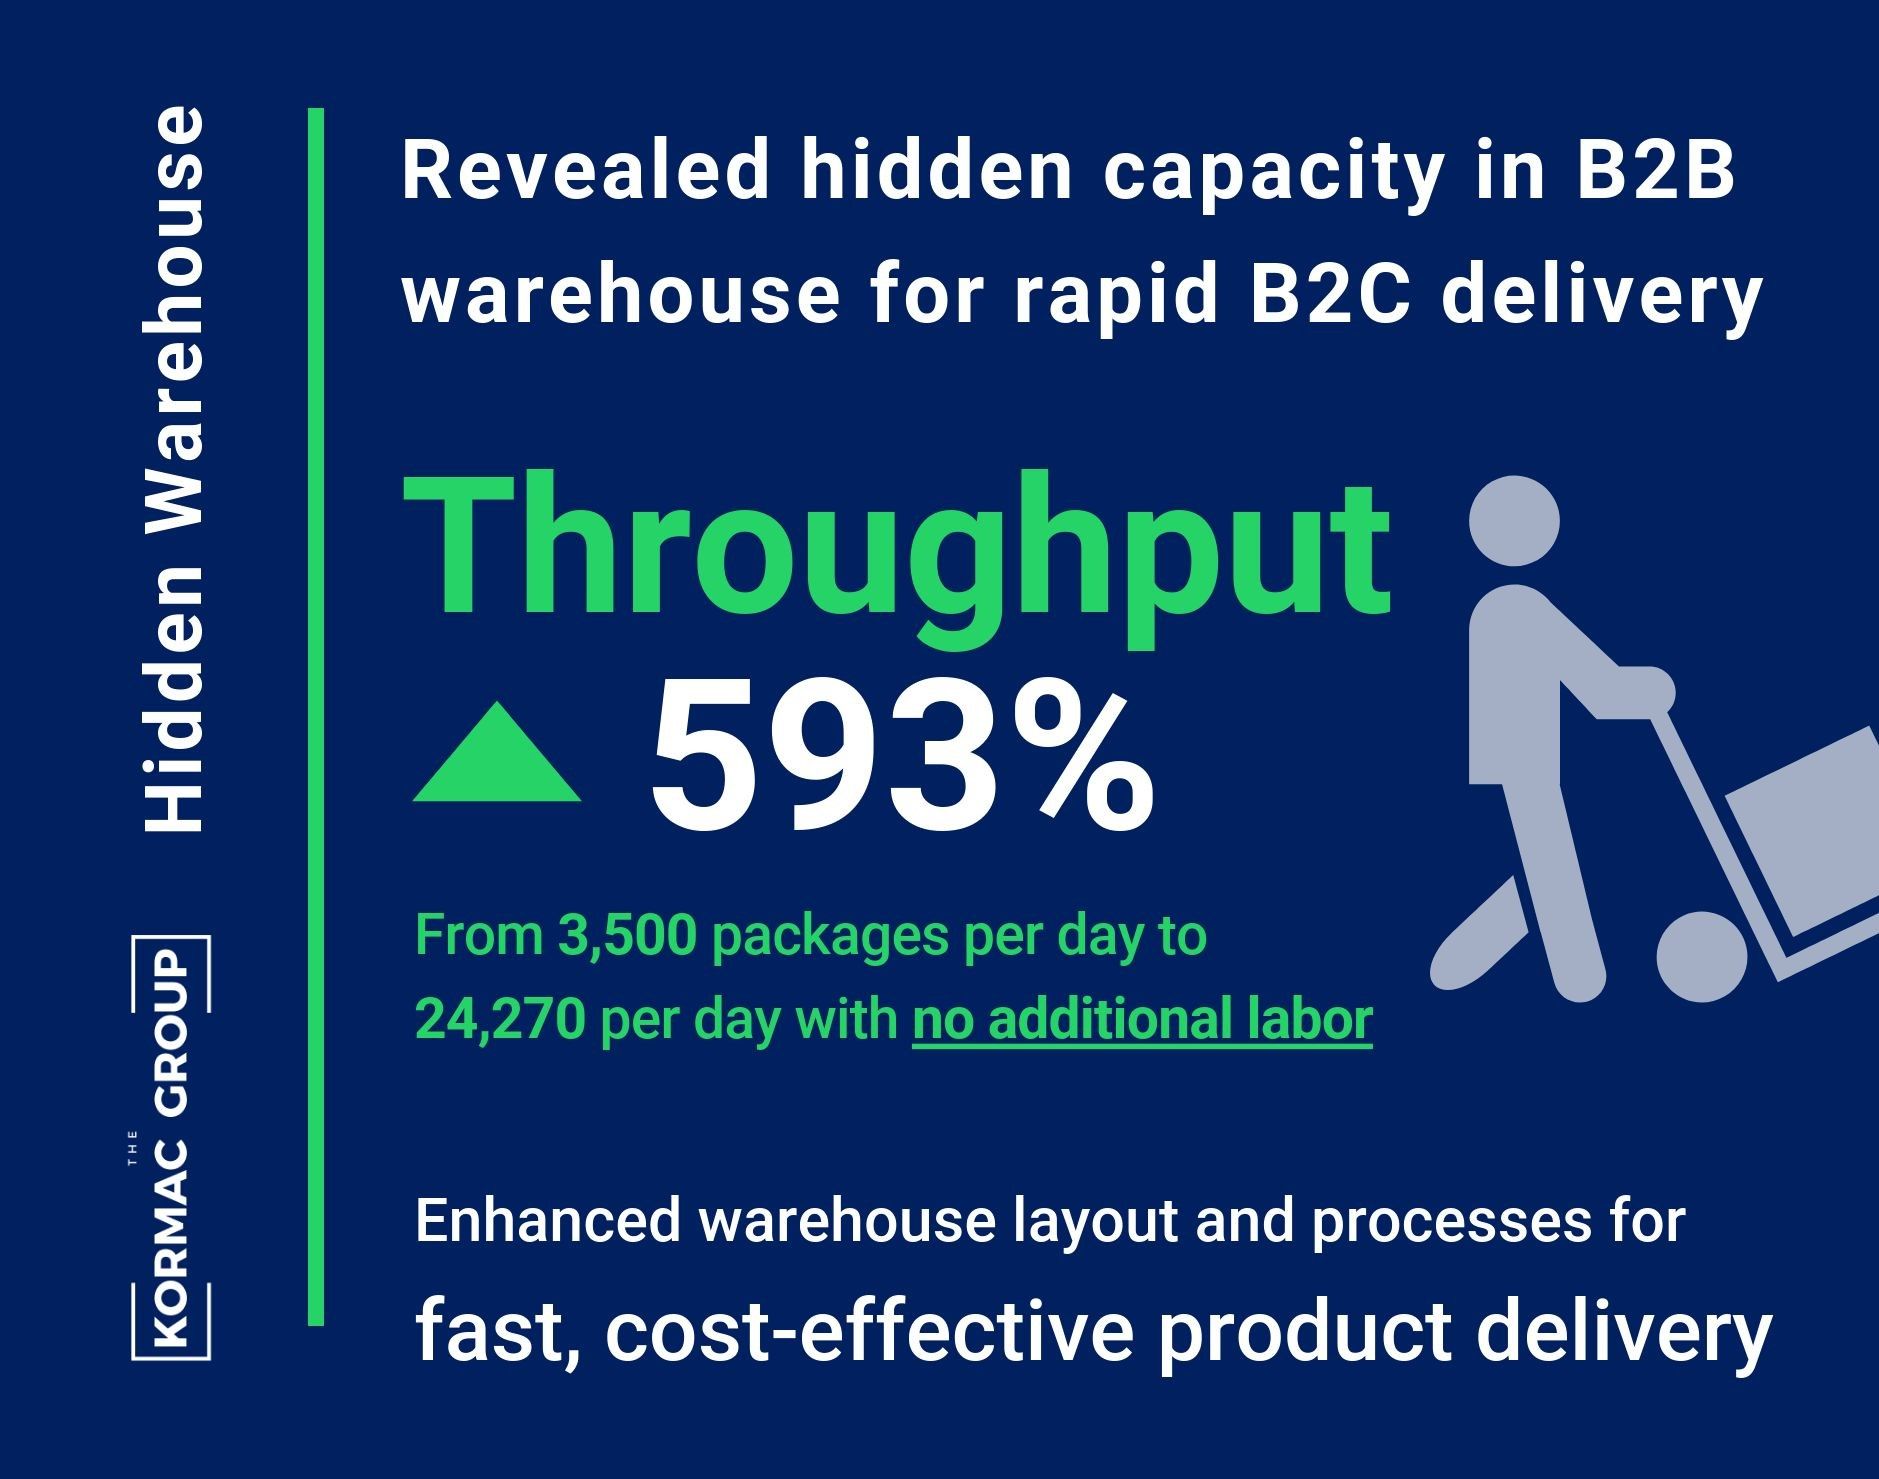 Hidden Warehouse Revealed hidden capacity in B2B warehouse for rapid B2C delivery Throughput up 593% from 3,500 packages per day to 24,270 per day with no additional labor Enhanced warehouse layout and processes for fast, cost-effective product delivery